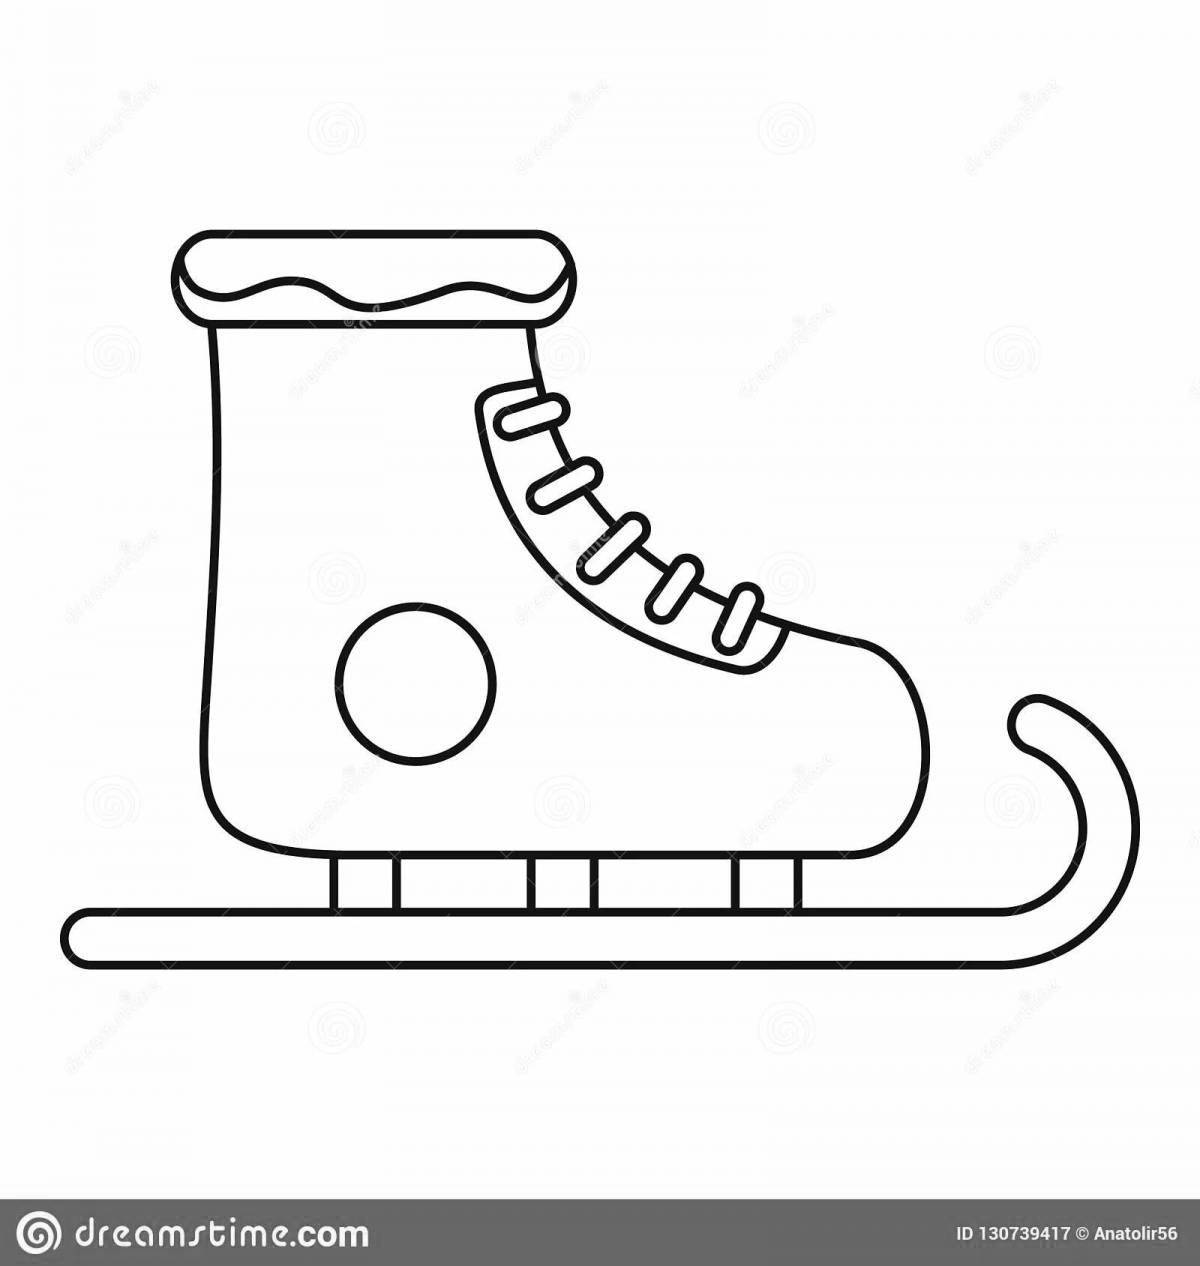 Live skates coloring for children 5-6 years old